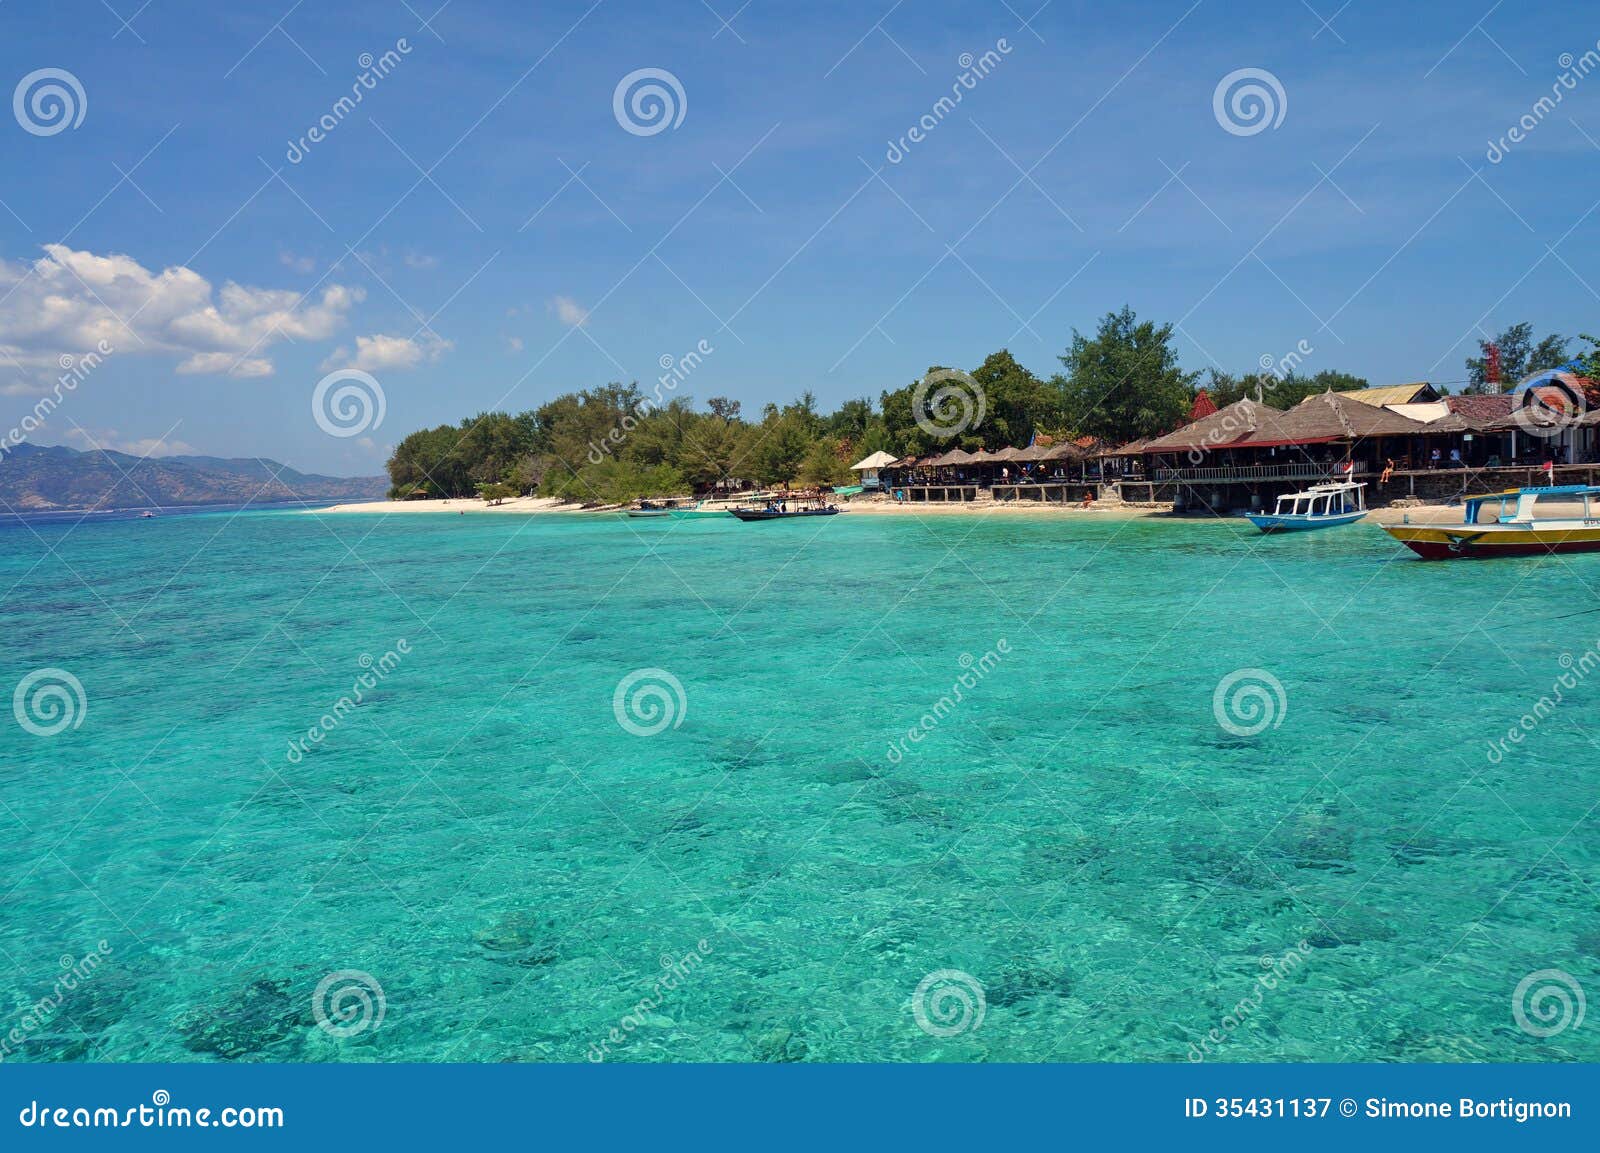 crystal clear turquoise water off the gili meno's coast